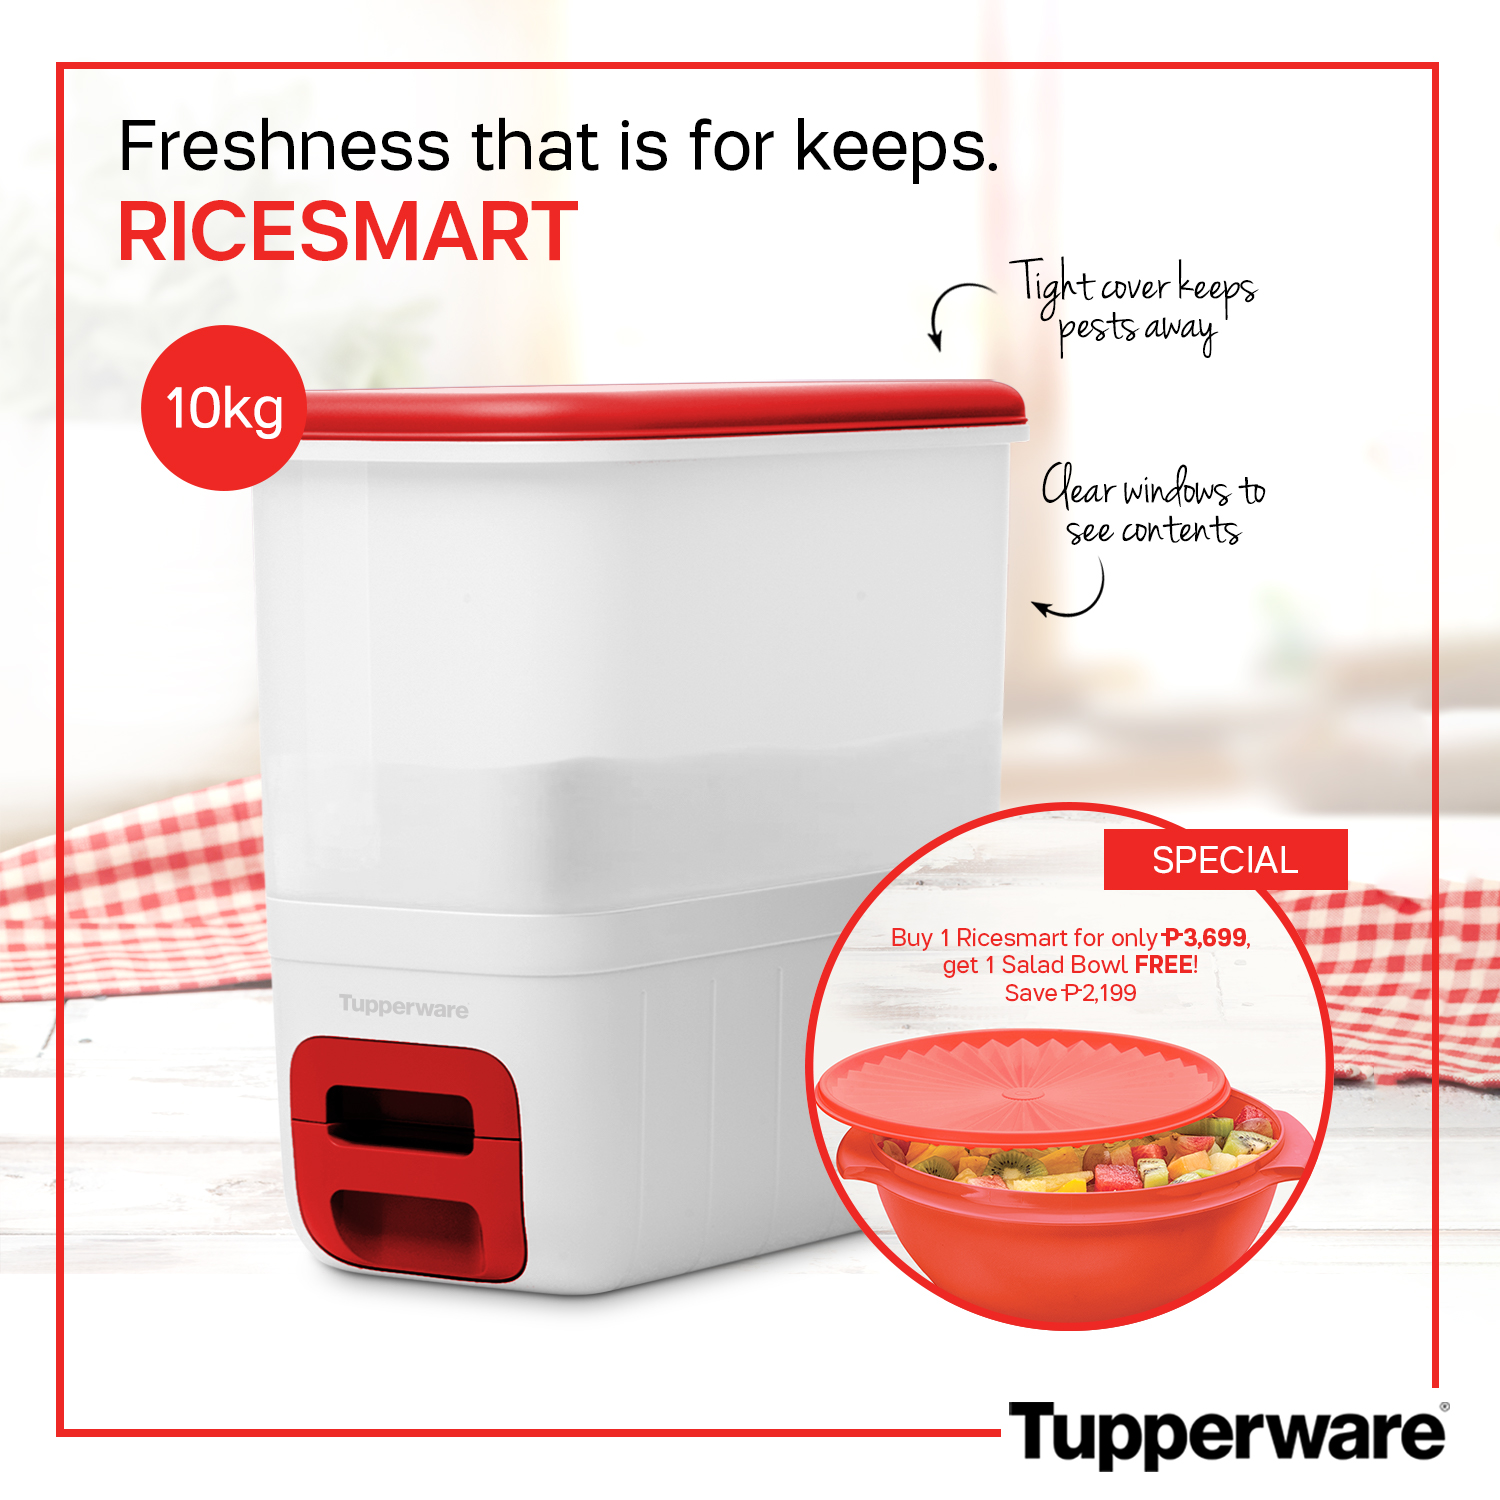 on Twitter: "Keep your grains fresh with the Tupperware Ricesmart, and cook perfect rice for your loved ones every Make sure to check other kitchen essentials on our